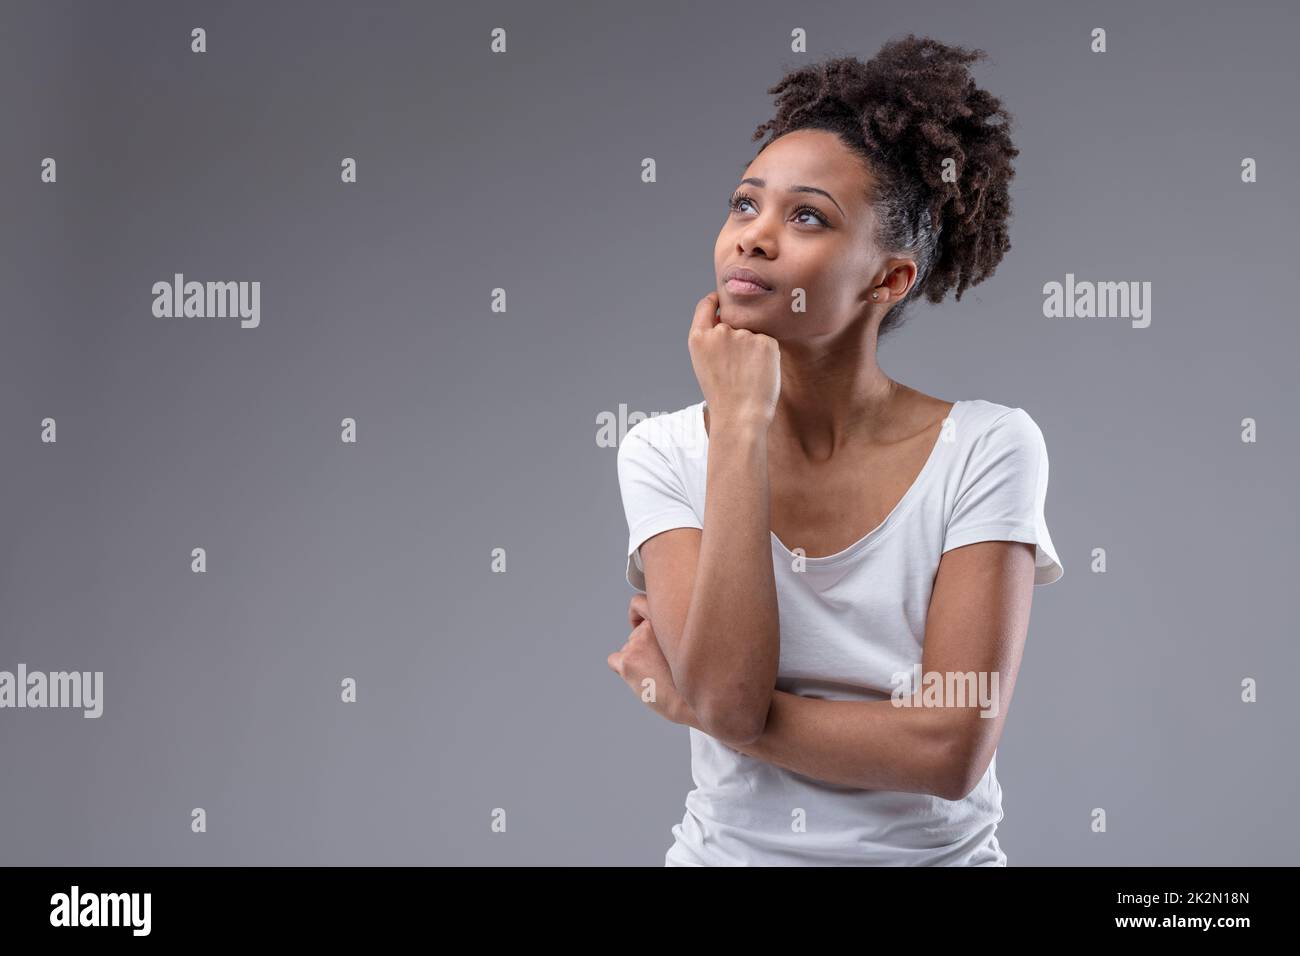 Pretty thoughtful young African woman Stock Photo